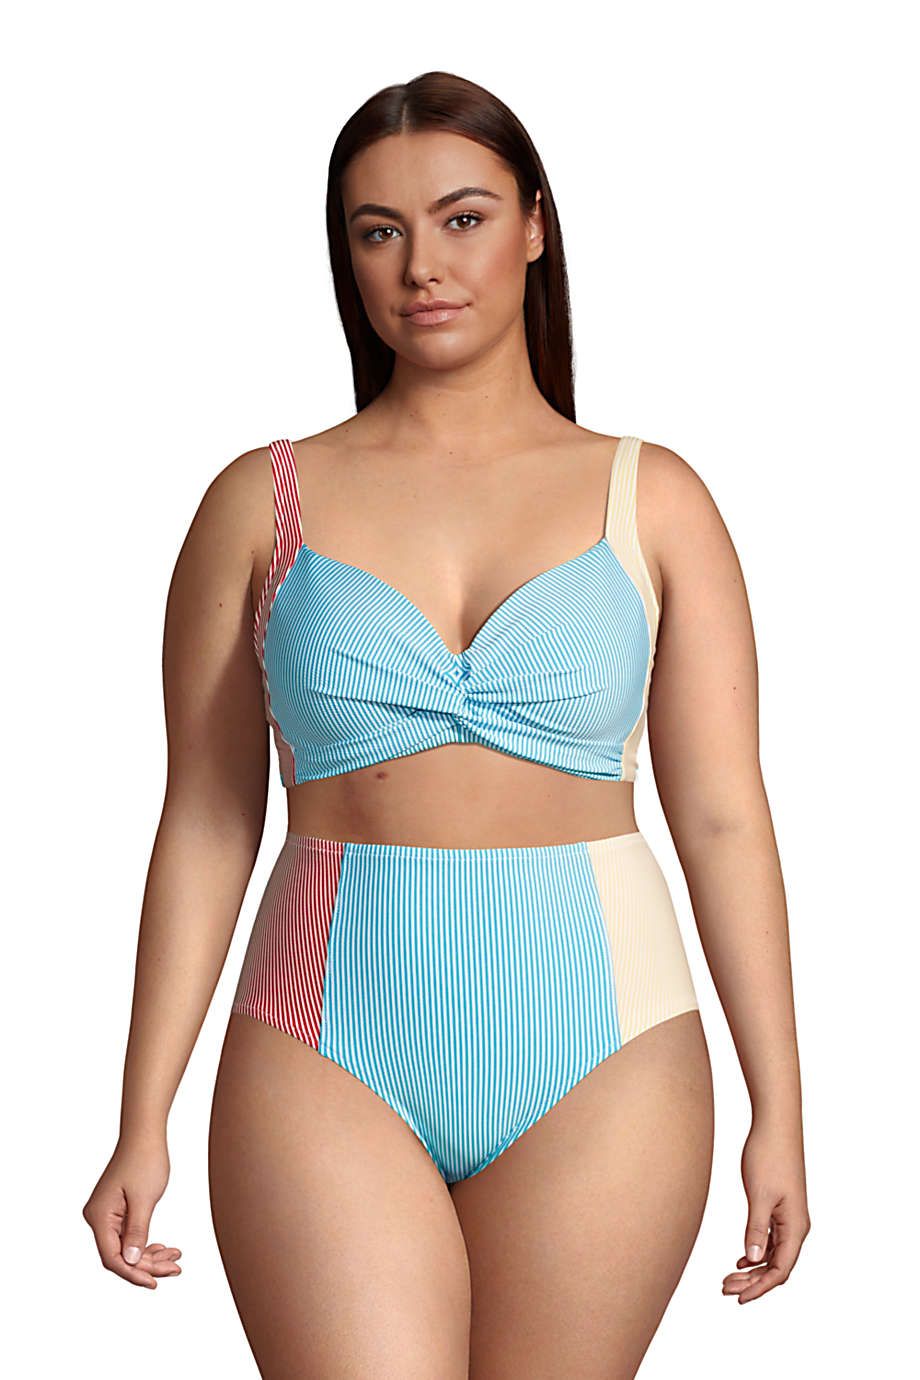 10 Swimsuits for Small Bust Body Types ideas  swimsuits, swimsuits for small  bust, bikinis